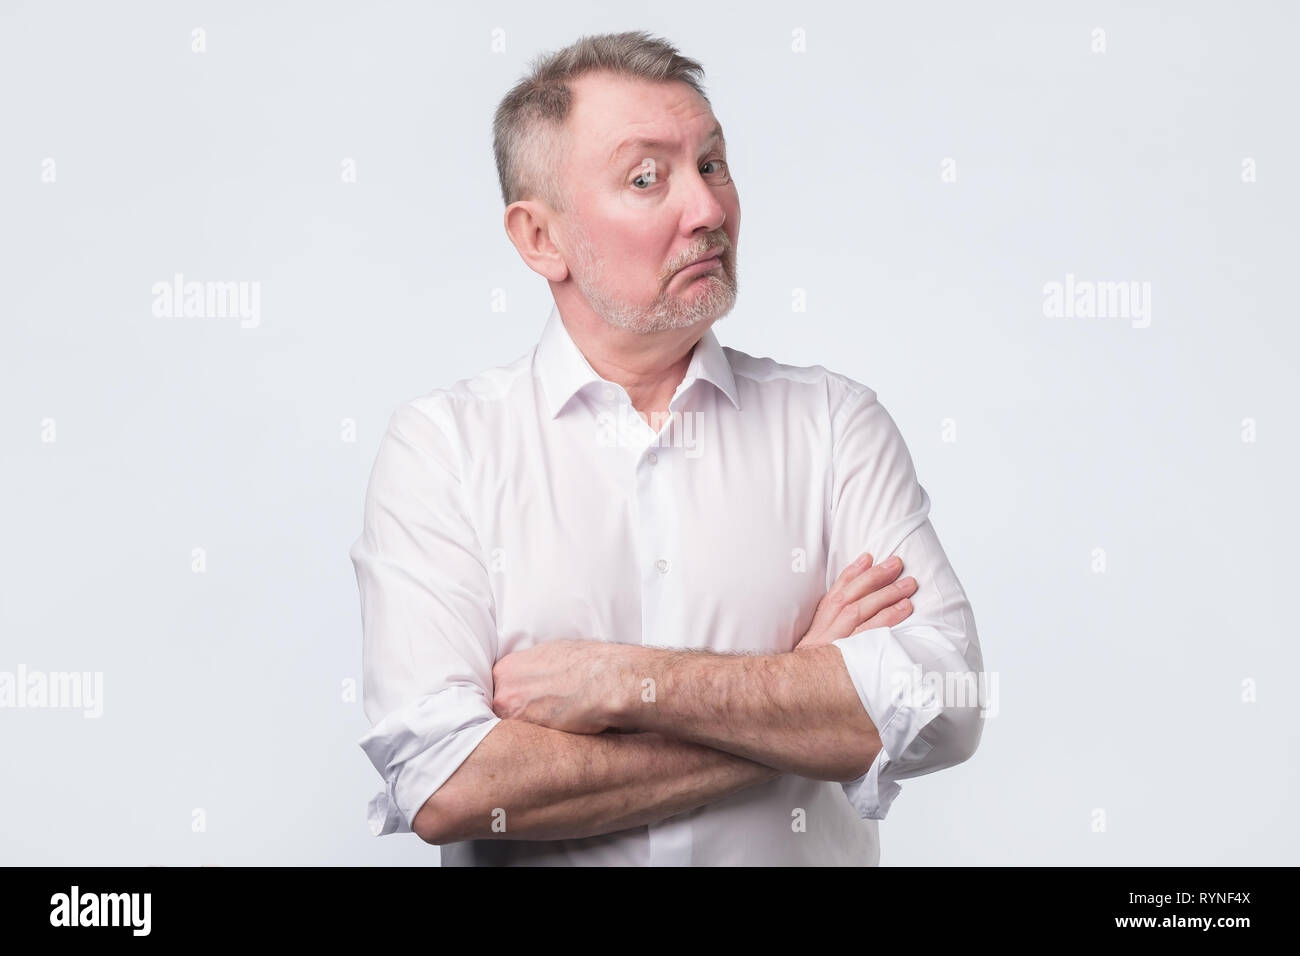 Doubtful senior man looking with disbelief expression. Stock Photo